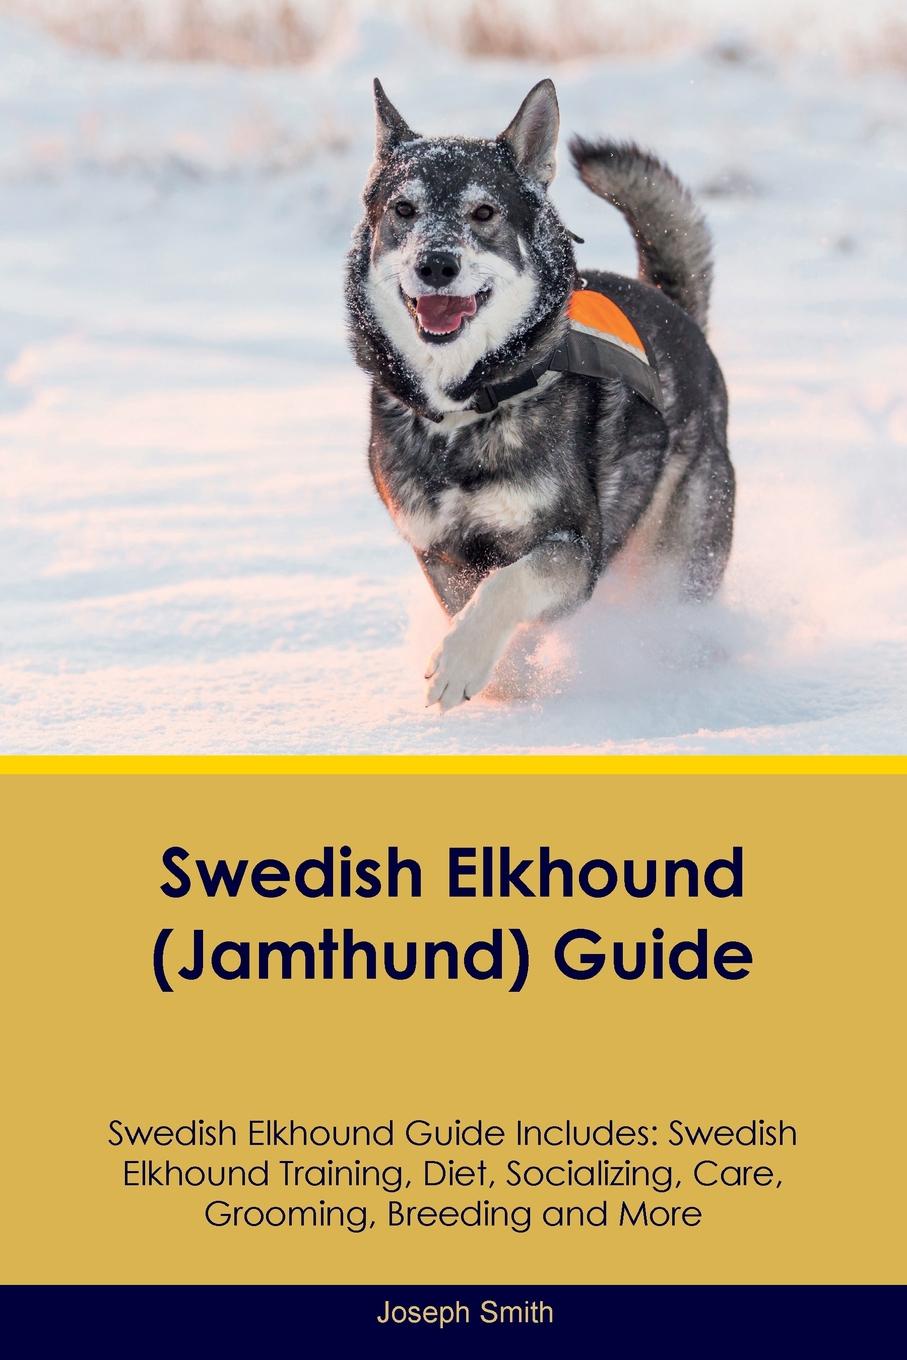 Swedish Elkhound (Jamthund) Guide Swedish Elkhound Guide Includes. Swedish Elkhound Training, Diet, Socializing, Care, Grooming, Breeding and More